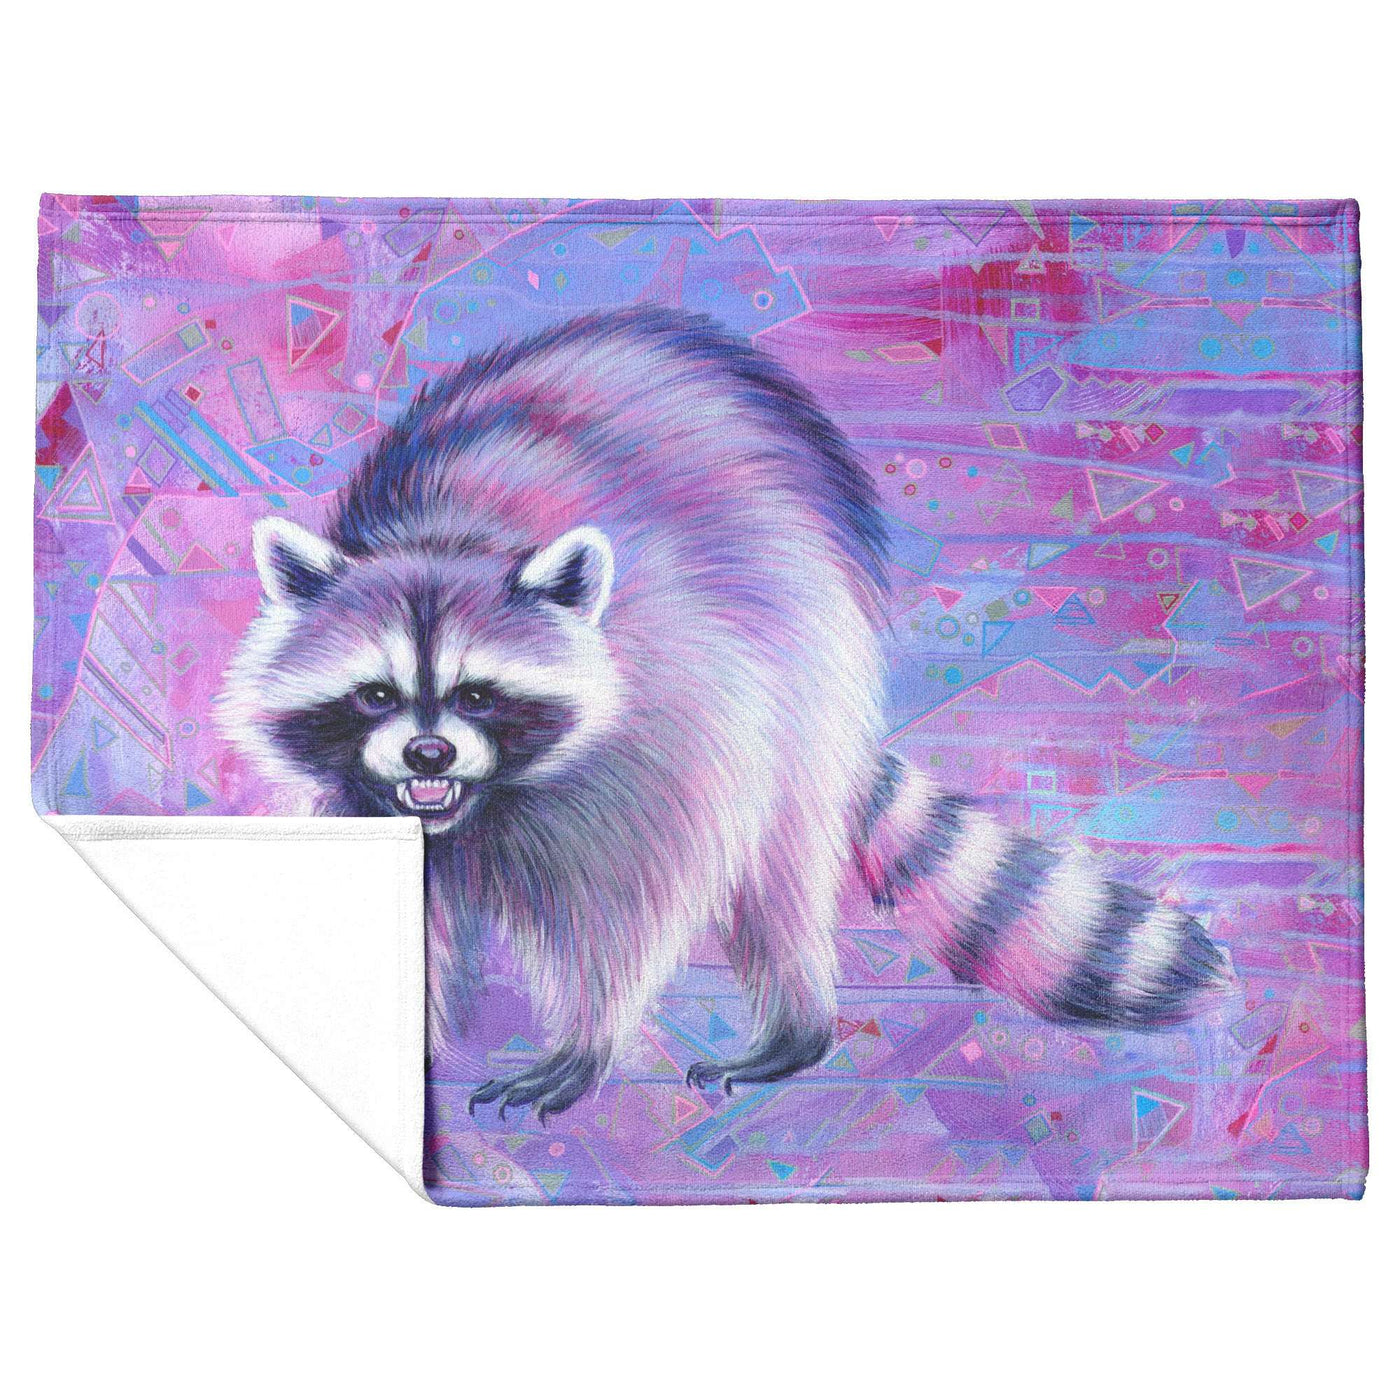 A vibrant Raccoon Blanket featuring a colorful illustration of a raccoon on a geometric patterned background in shades of pink and purple.